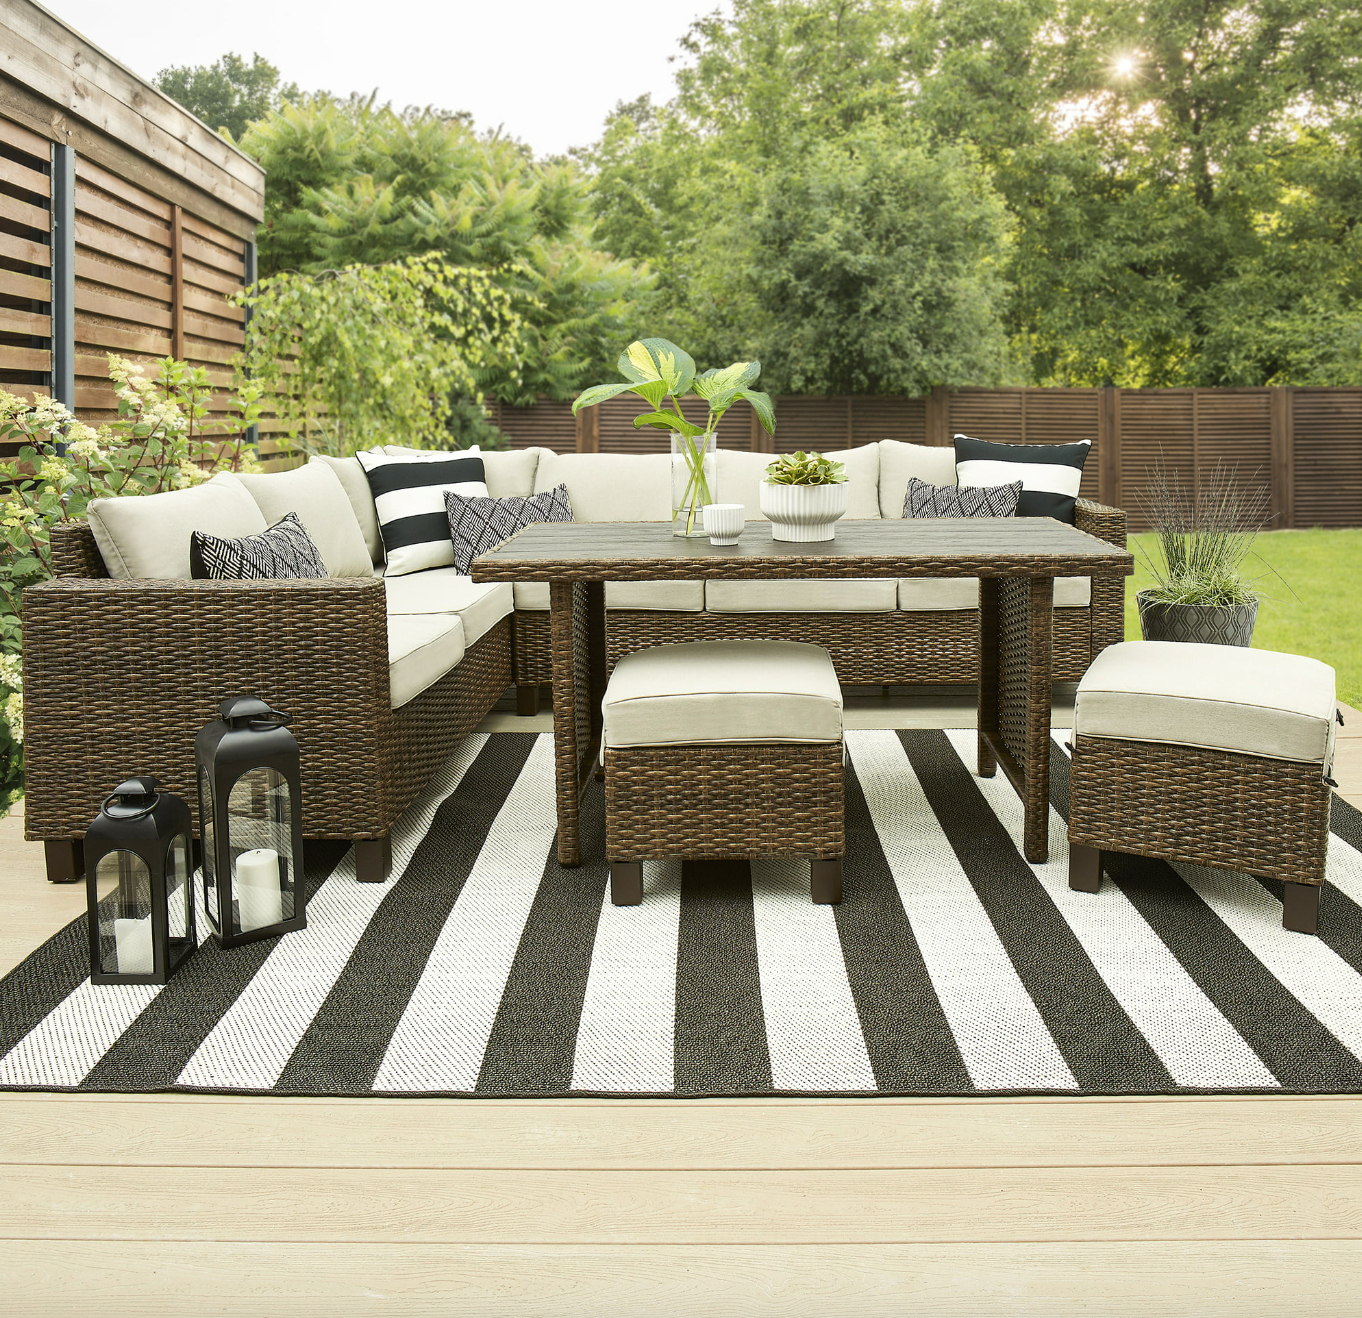 the dark wicker sectional, dining table and ottomans with tan cushions in a decorated patio space